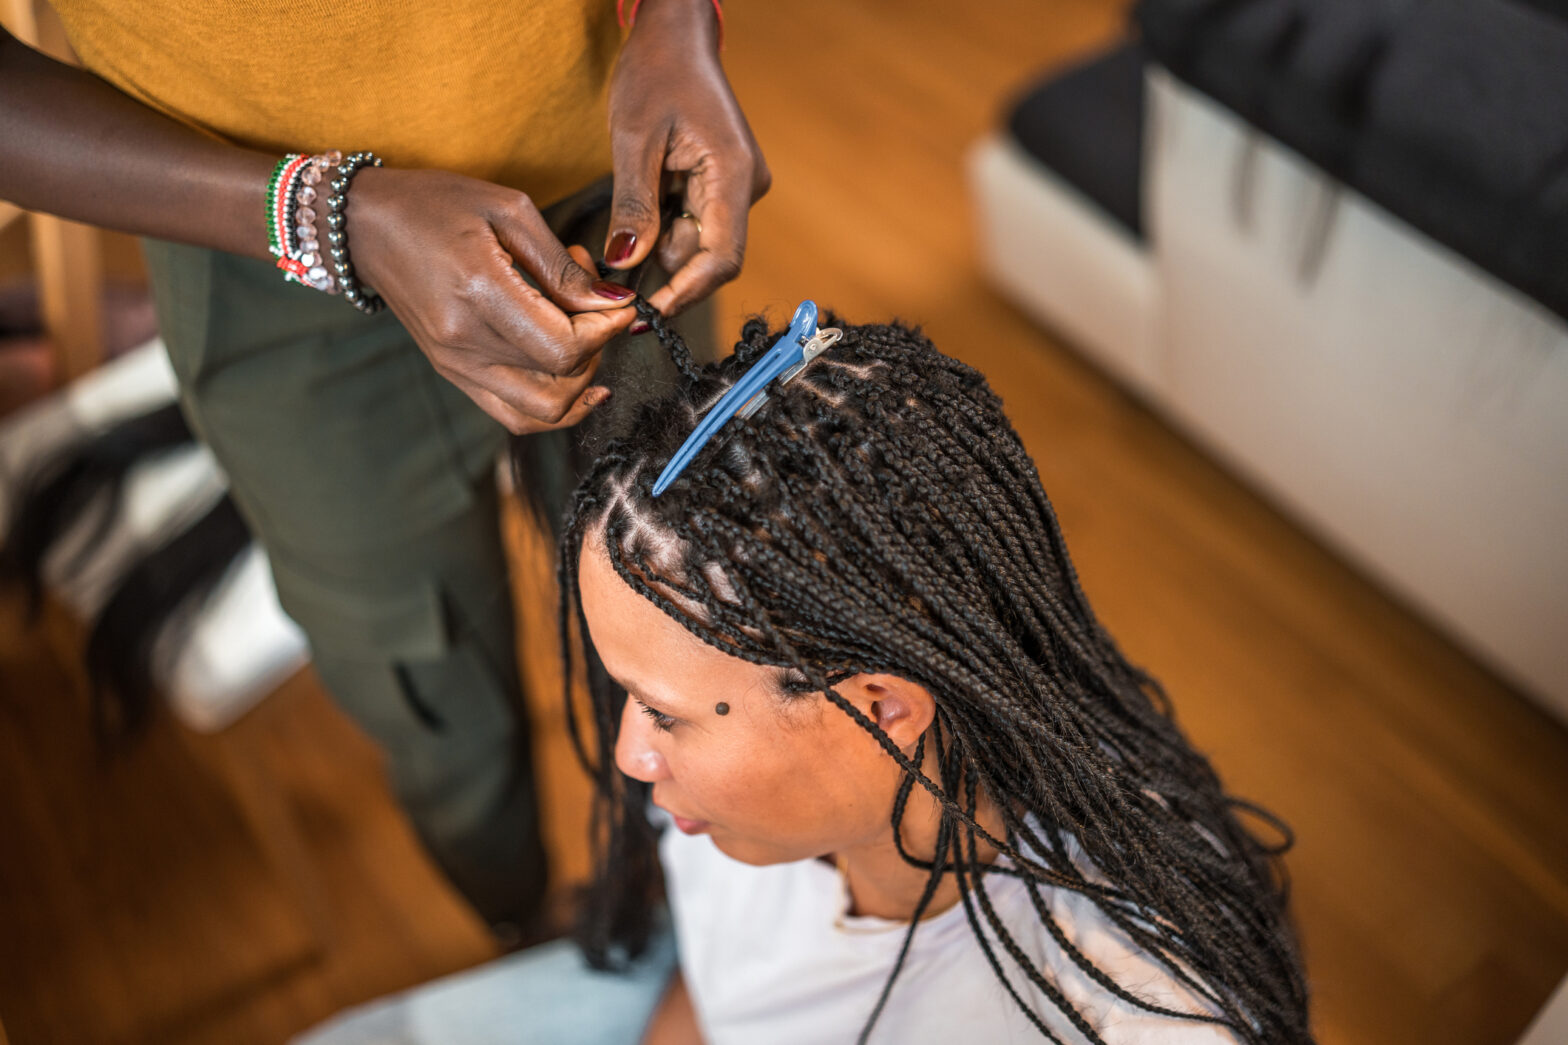 A professional mid-adult Black female hairstylist diligently works on braiding the hair of a Mixed race female client in a home setting.